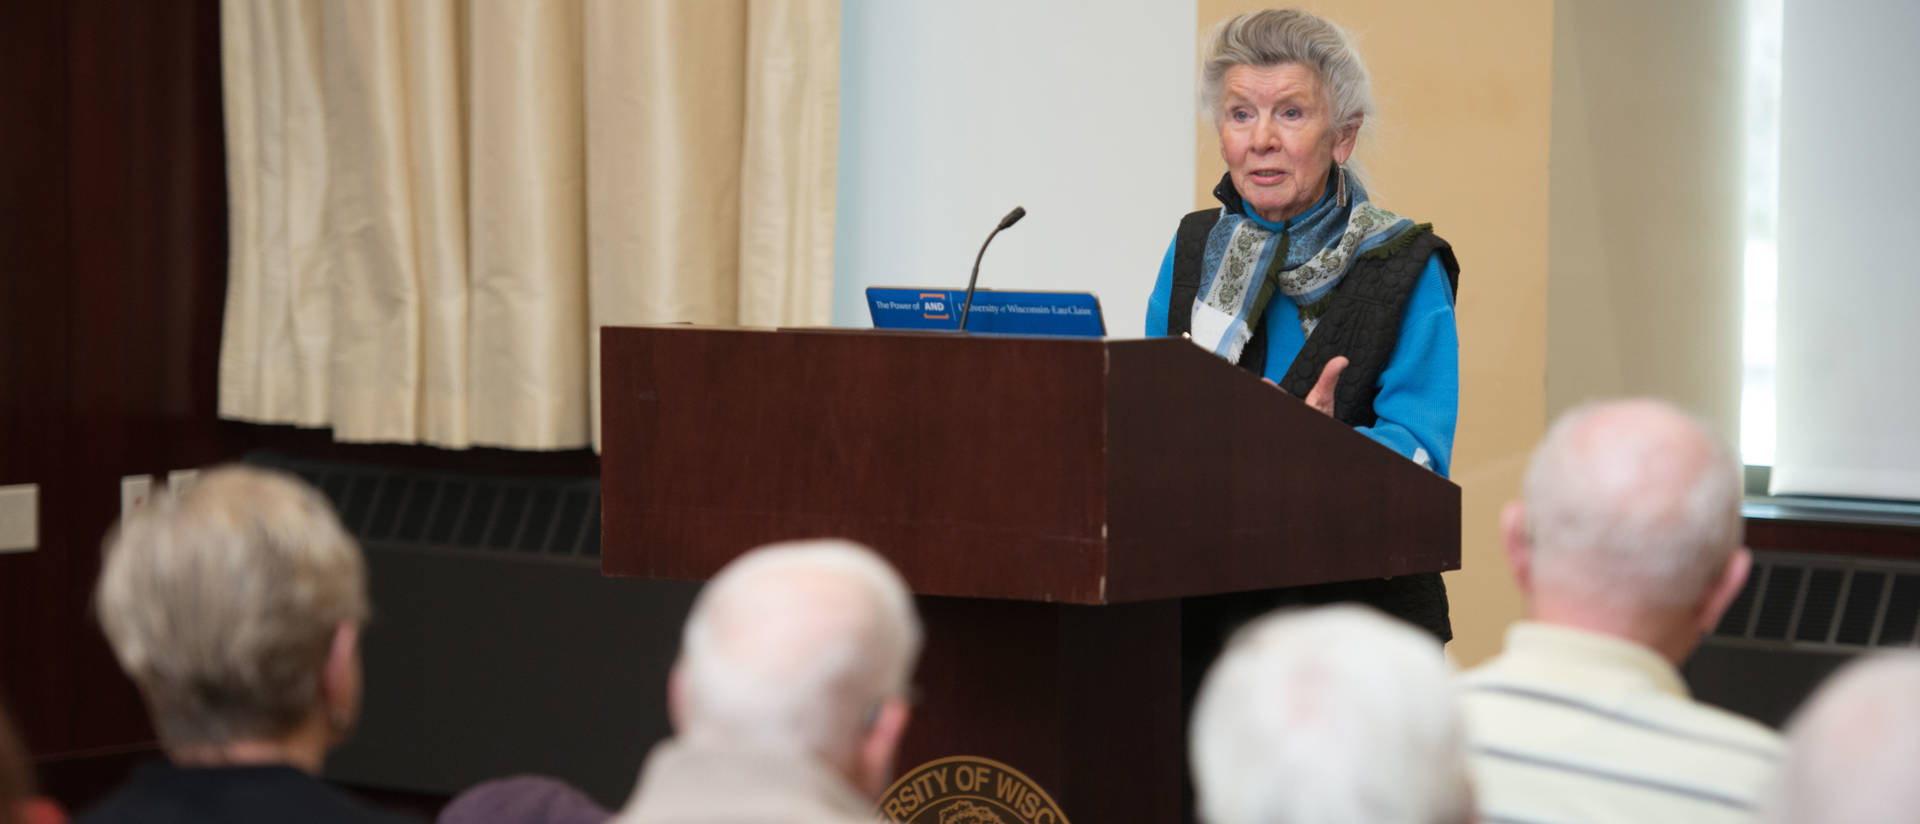 Joan Christopherson Schmidt, donor of the Frederick G. and Joan Christopherson Schmidt Robert Frost Collection to the UW-Eau Claire Foundation, reads during UW-Eau Claire's 2017 Robert Frost Celebration of American Poetry.